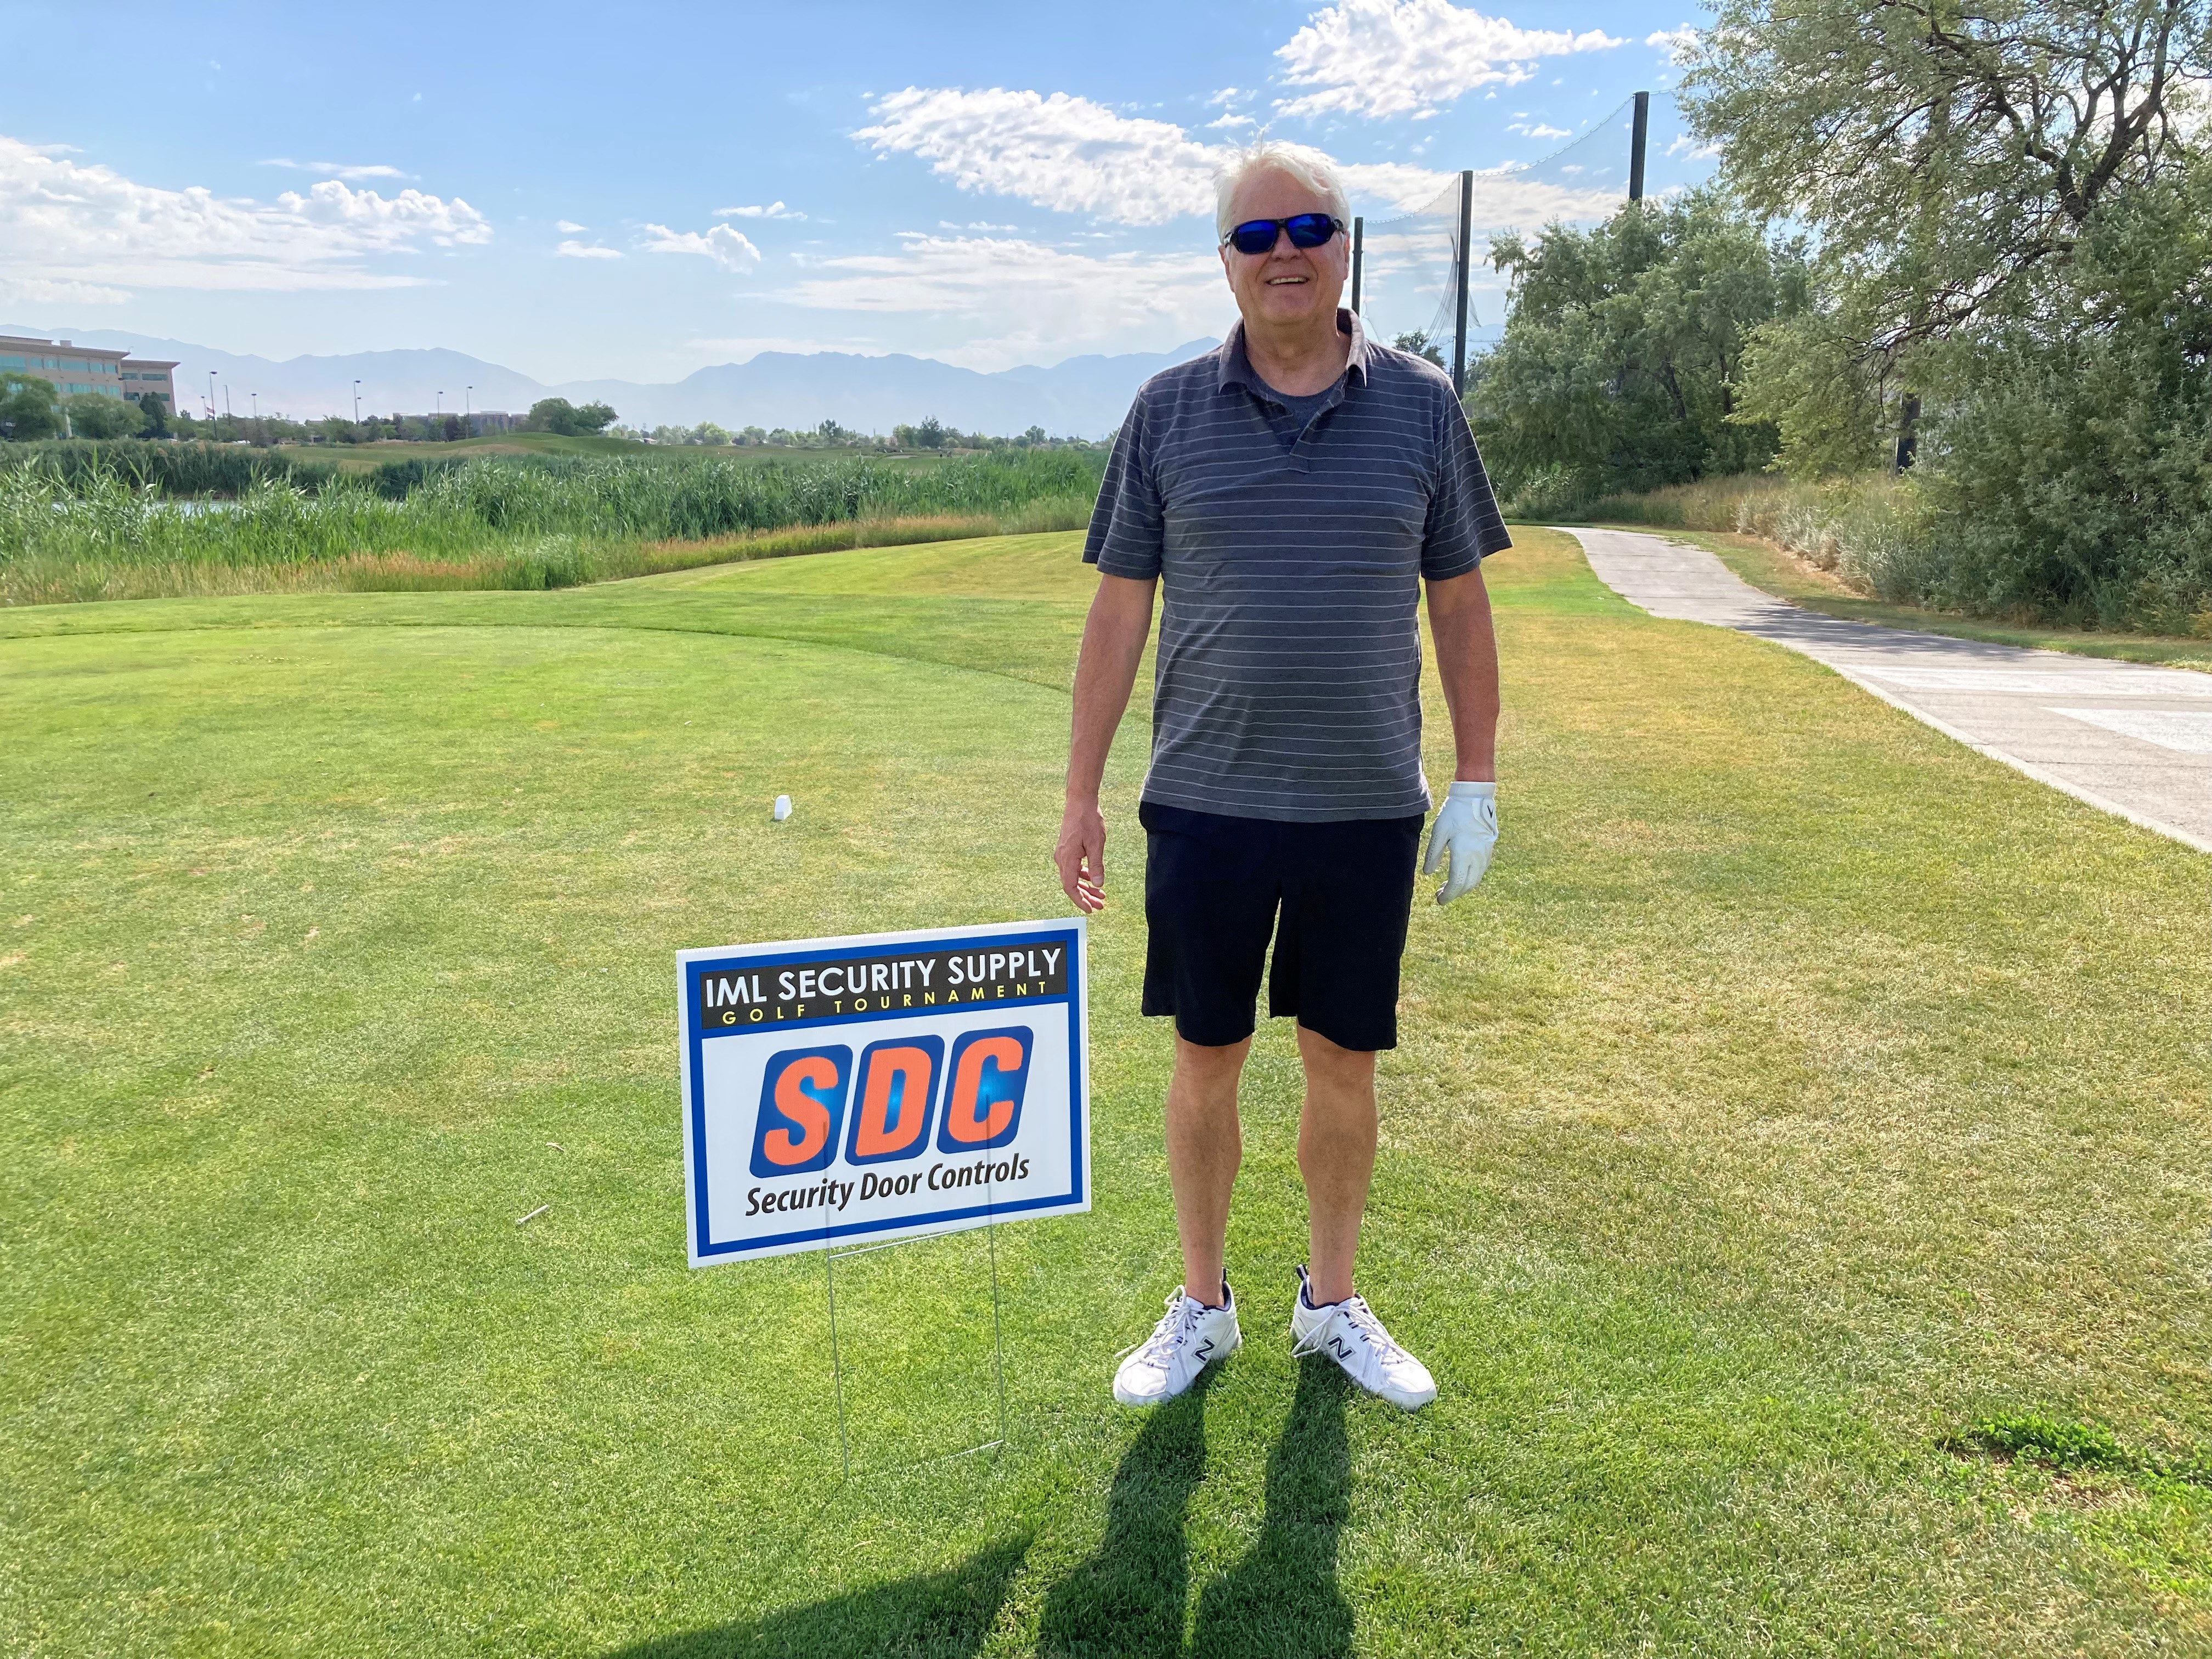 SDC Gets a Grip on Sales at IMLSS Utah Golf Tourney